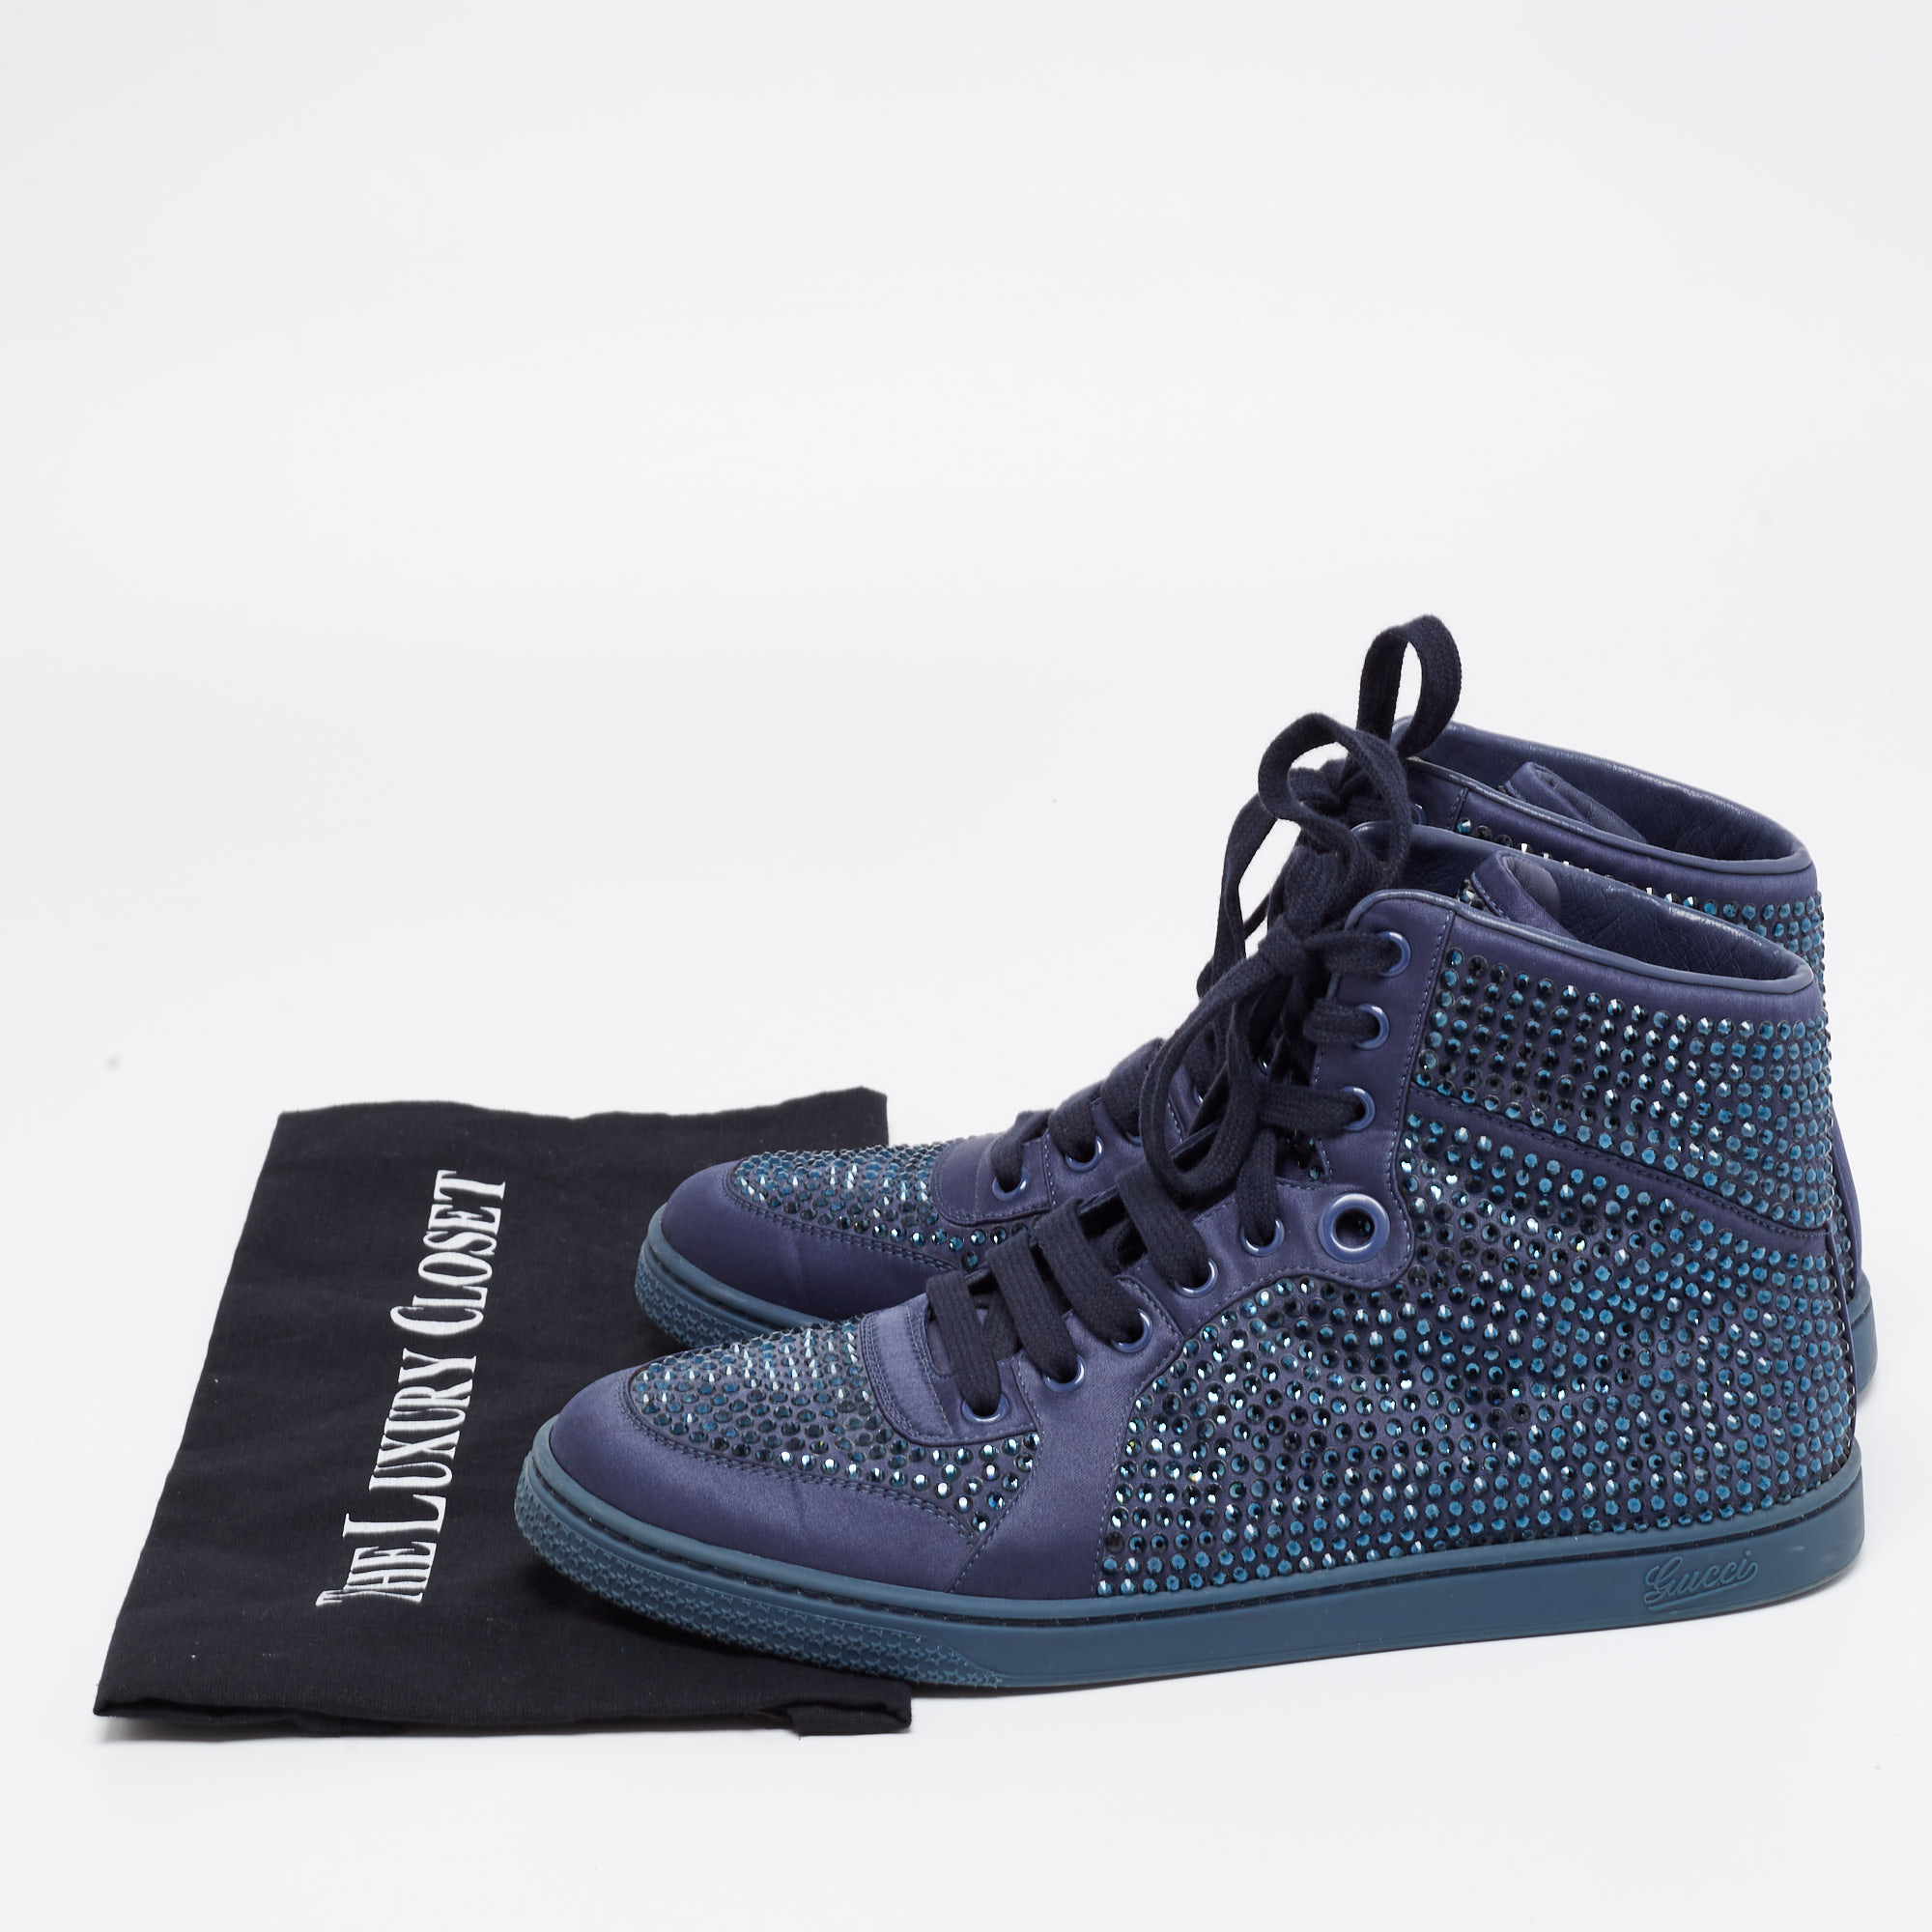 Gucci Blue Satin Crystal Embellished High Top Sneakers Size 39.5